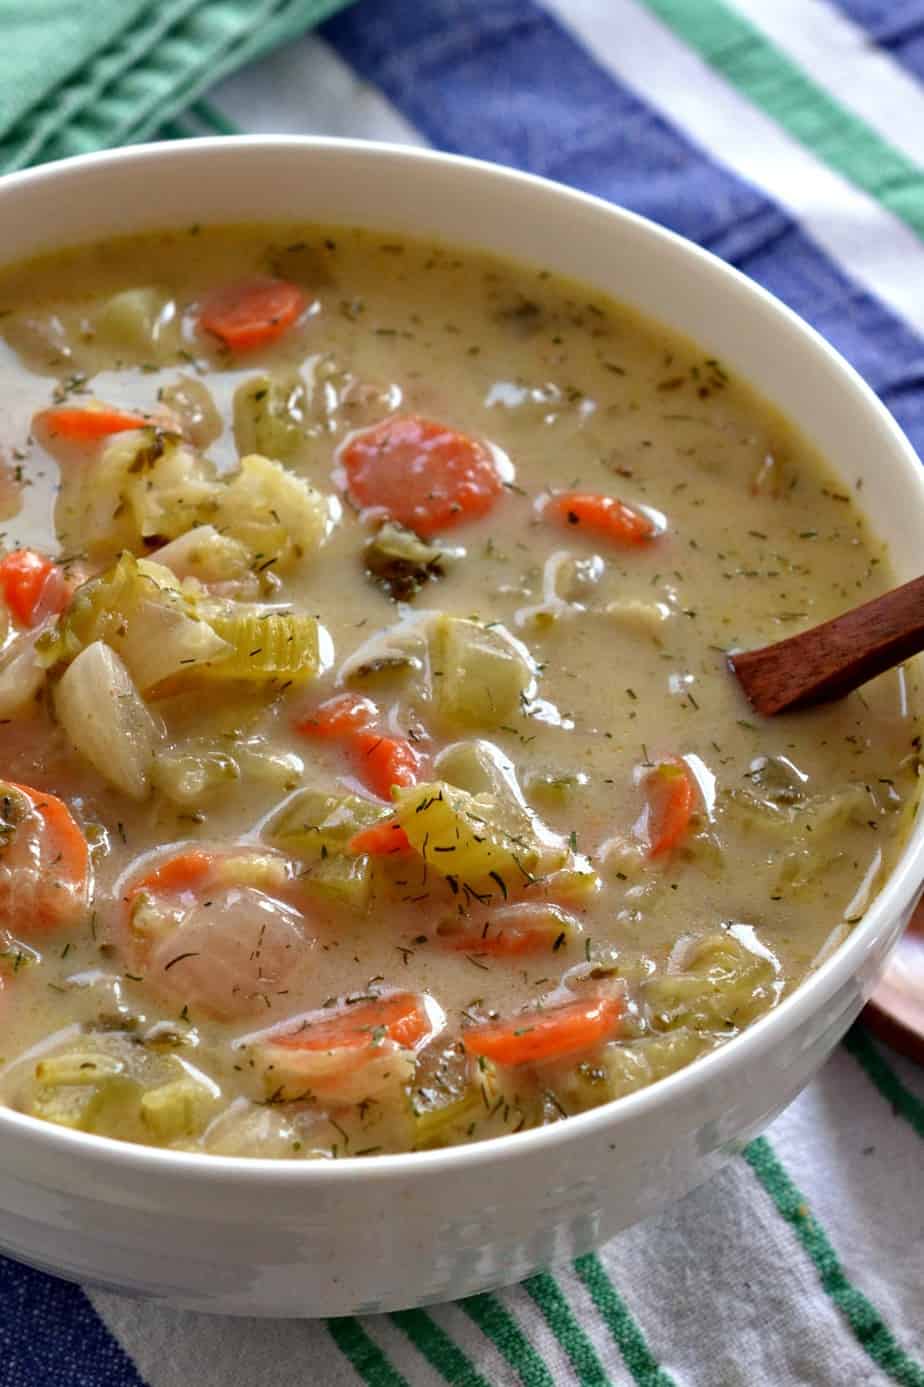 Creamy dill pickle soup combines onions, carrots, celery, and herbs for a delicious, unique flavor